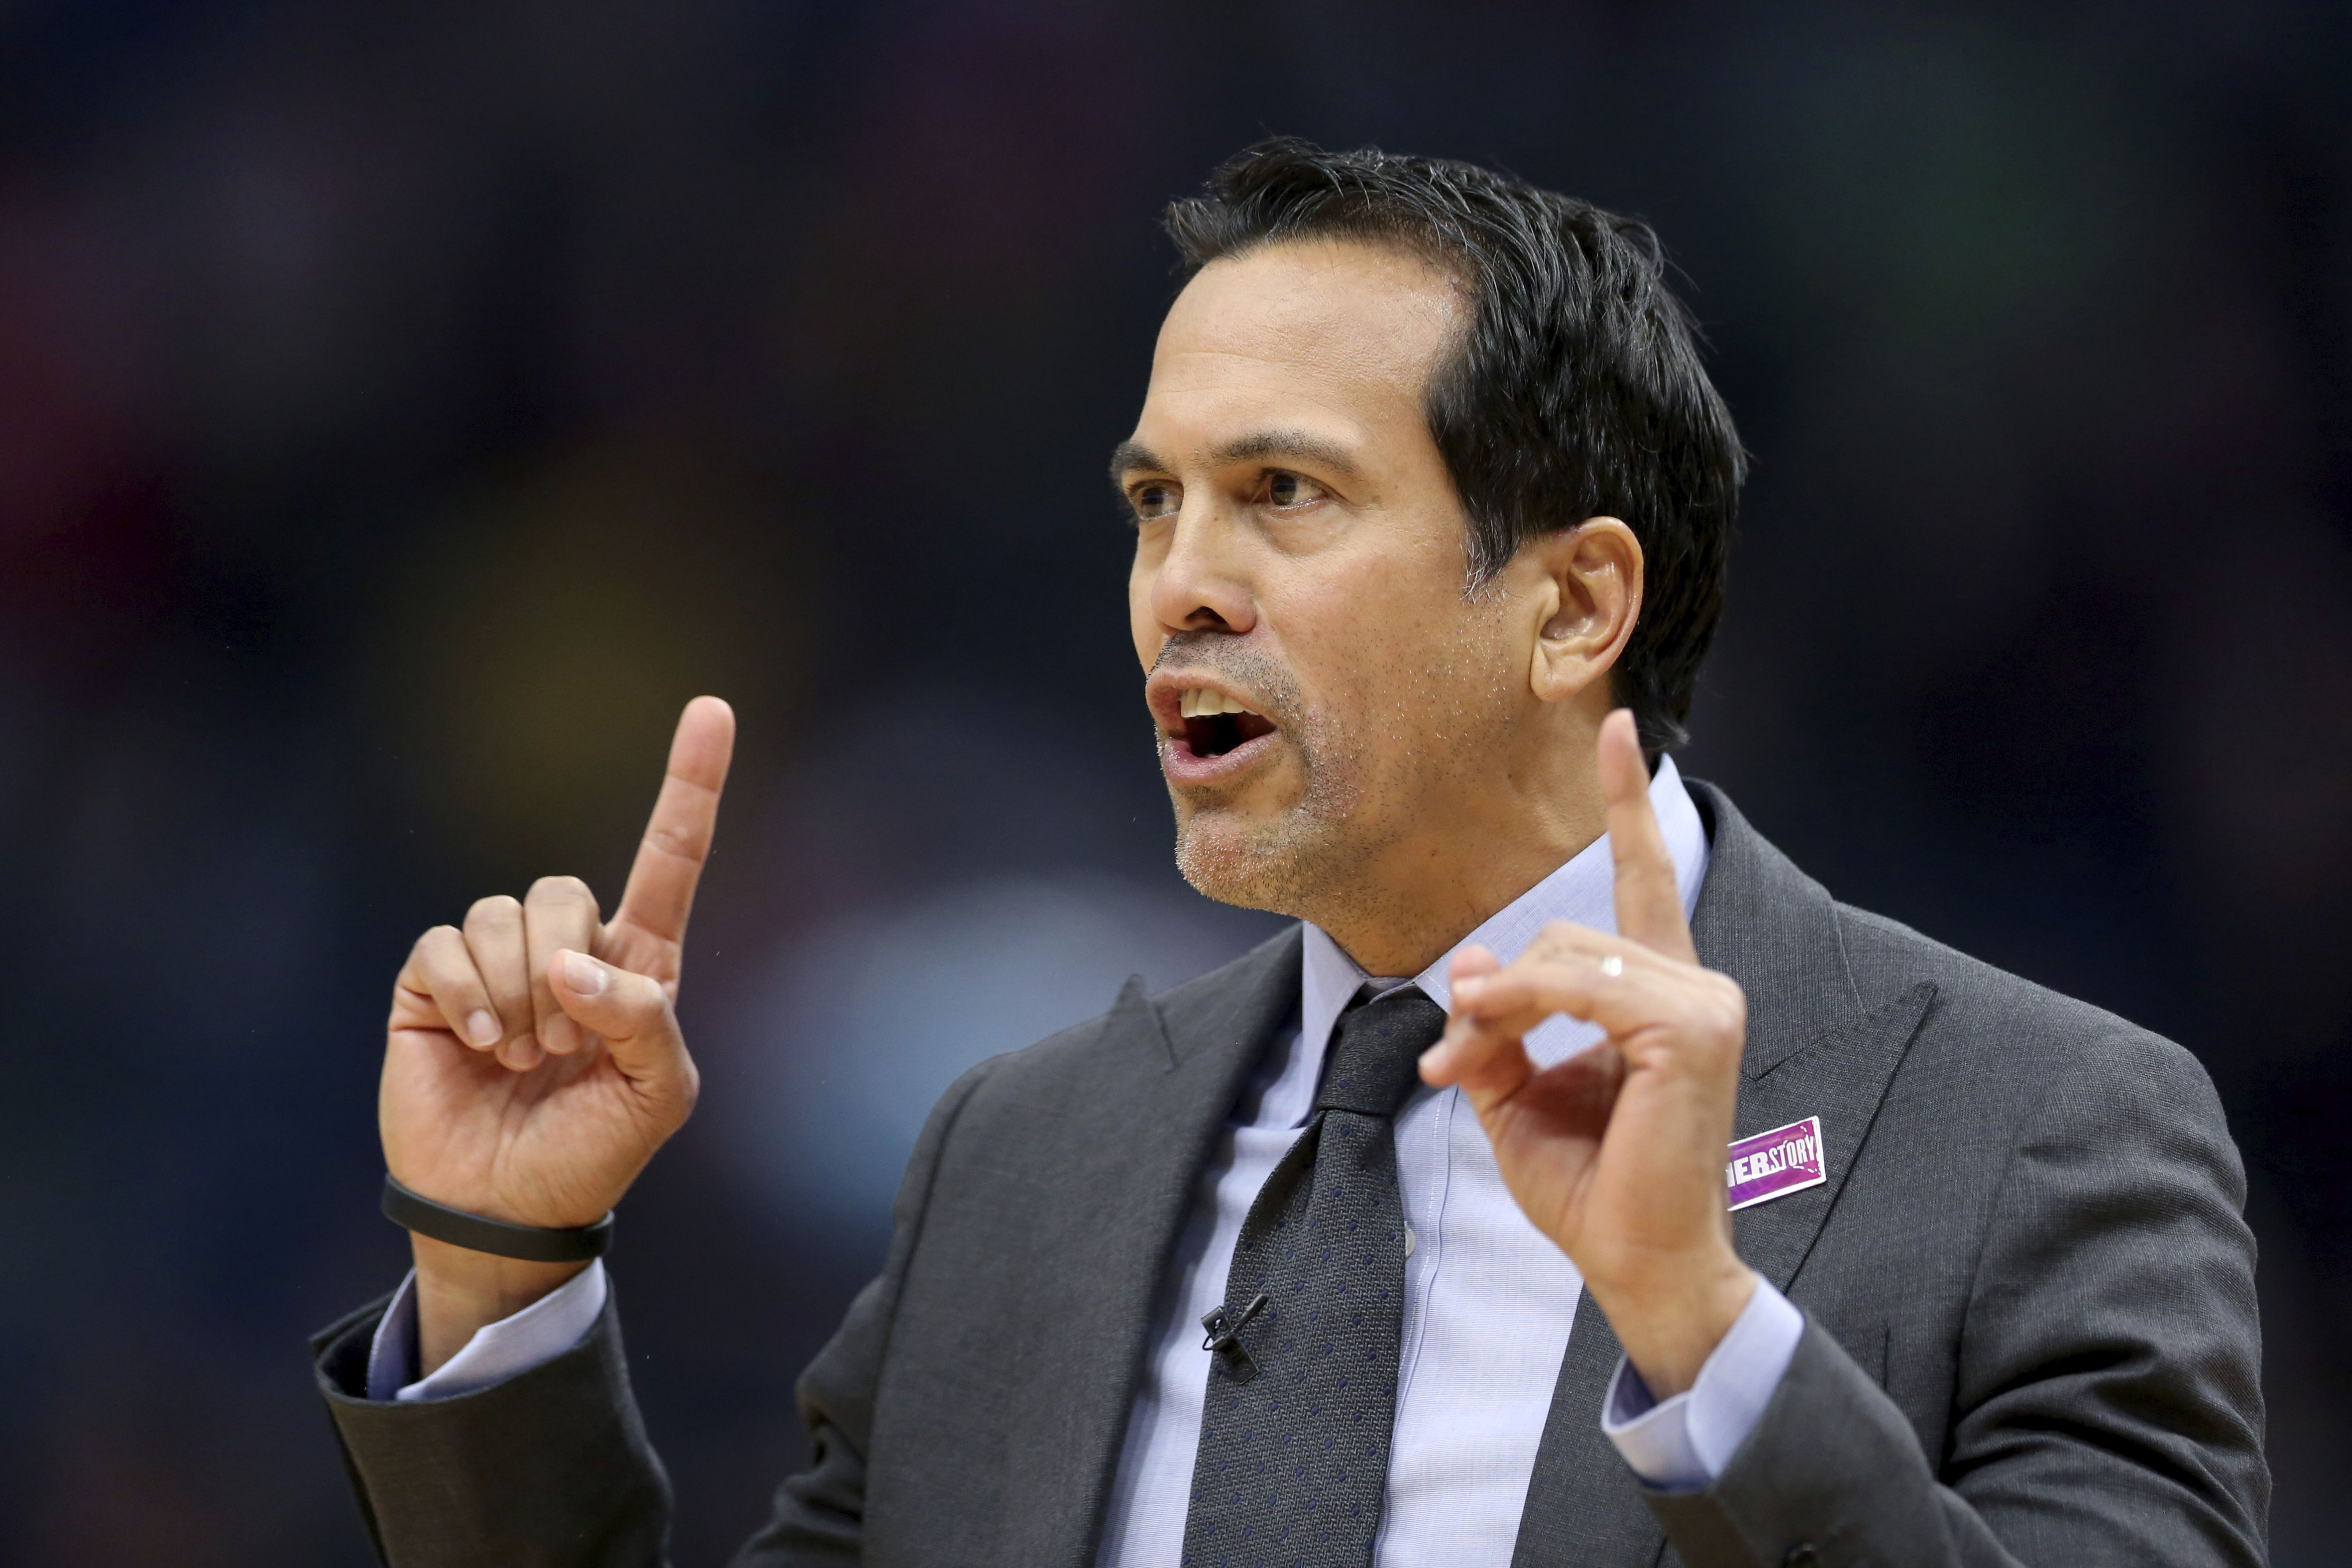 Spoelstra Named Coach of the Month - March 2013